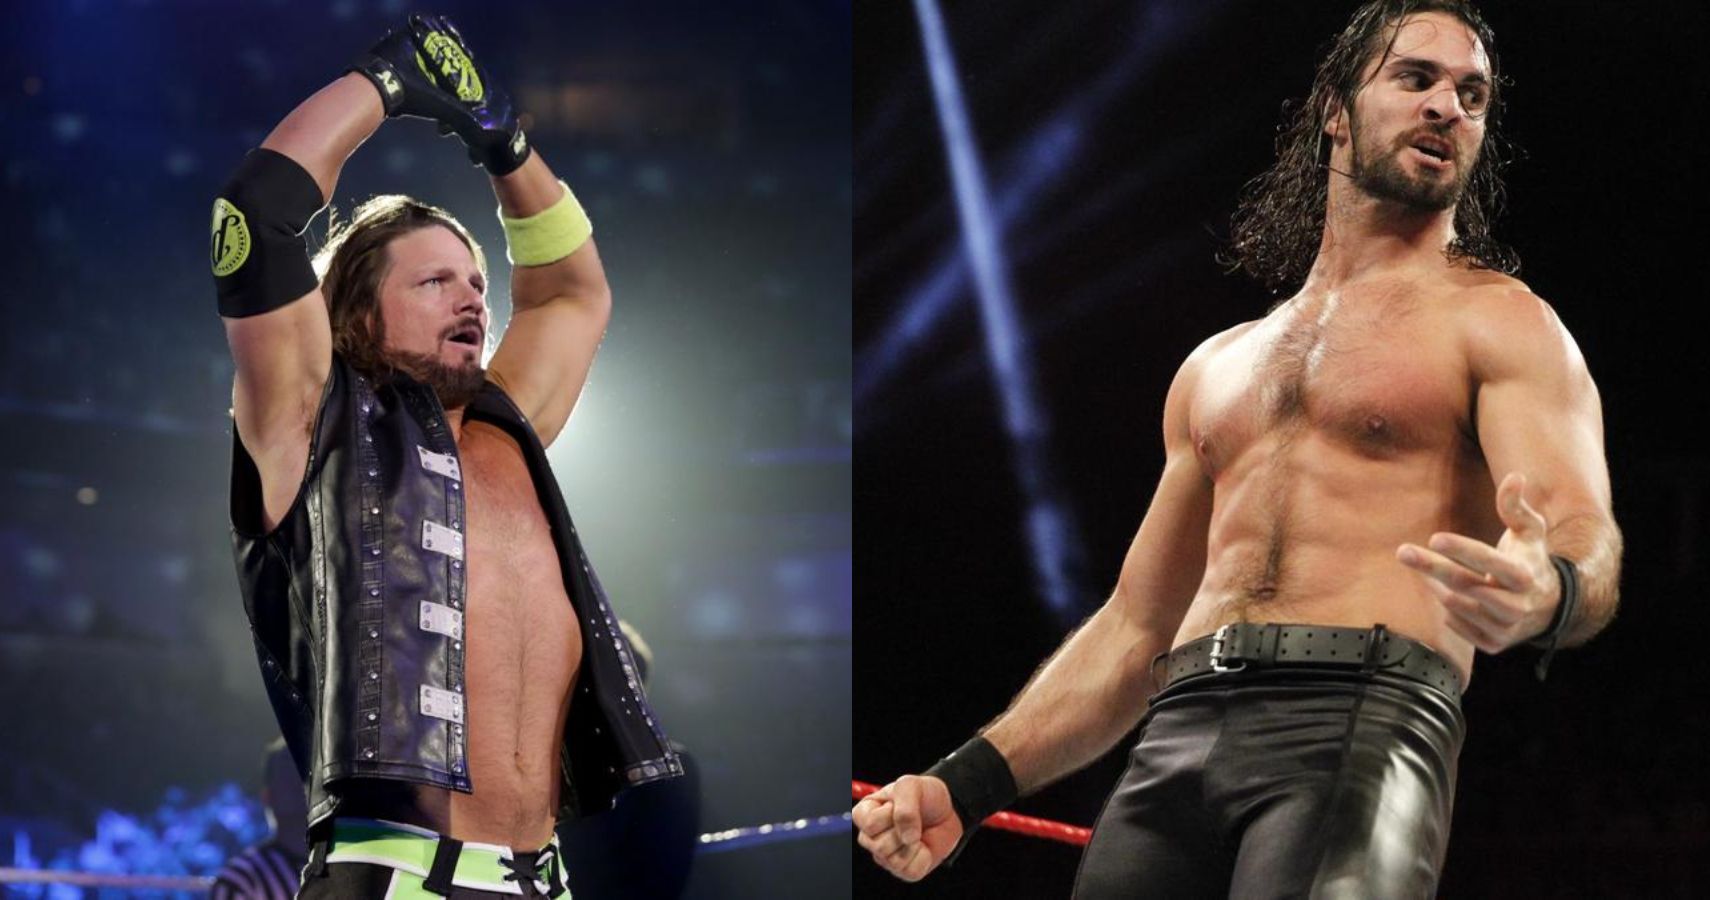 5 WWE Heel Turns That No One Saw Coming (& 5 That Were Obvious)